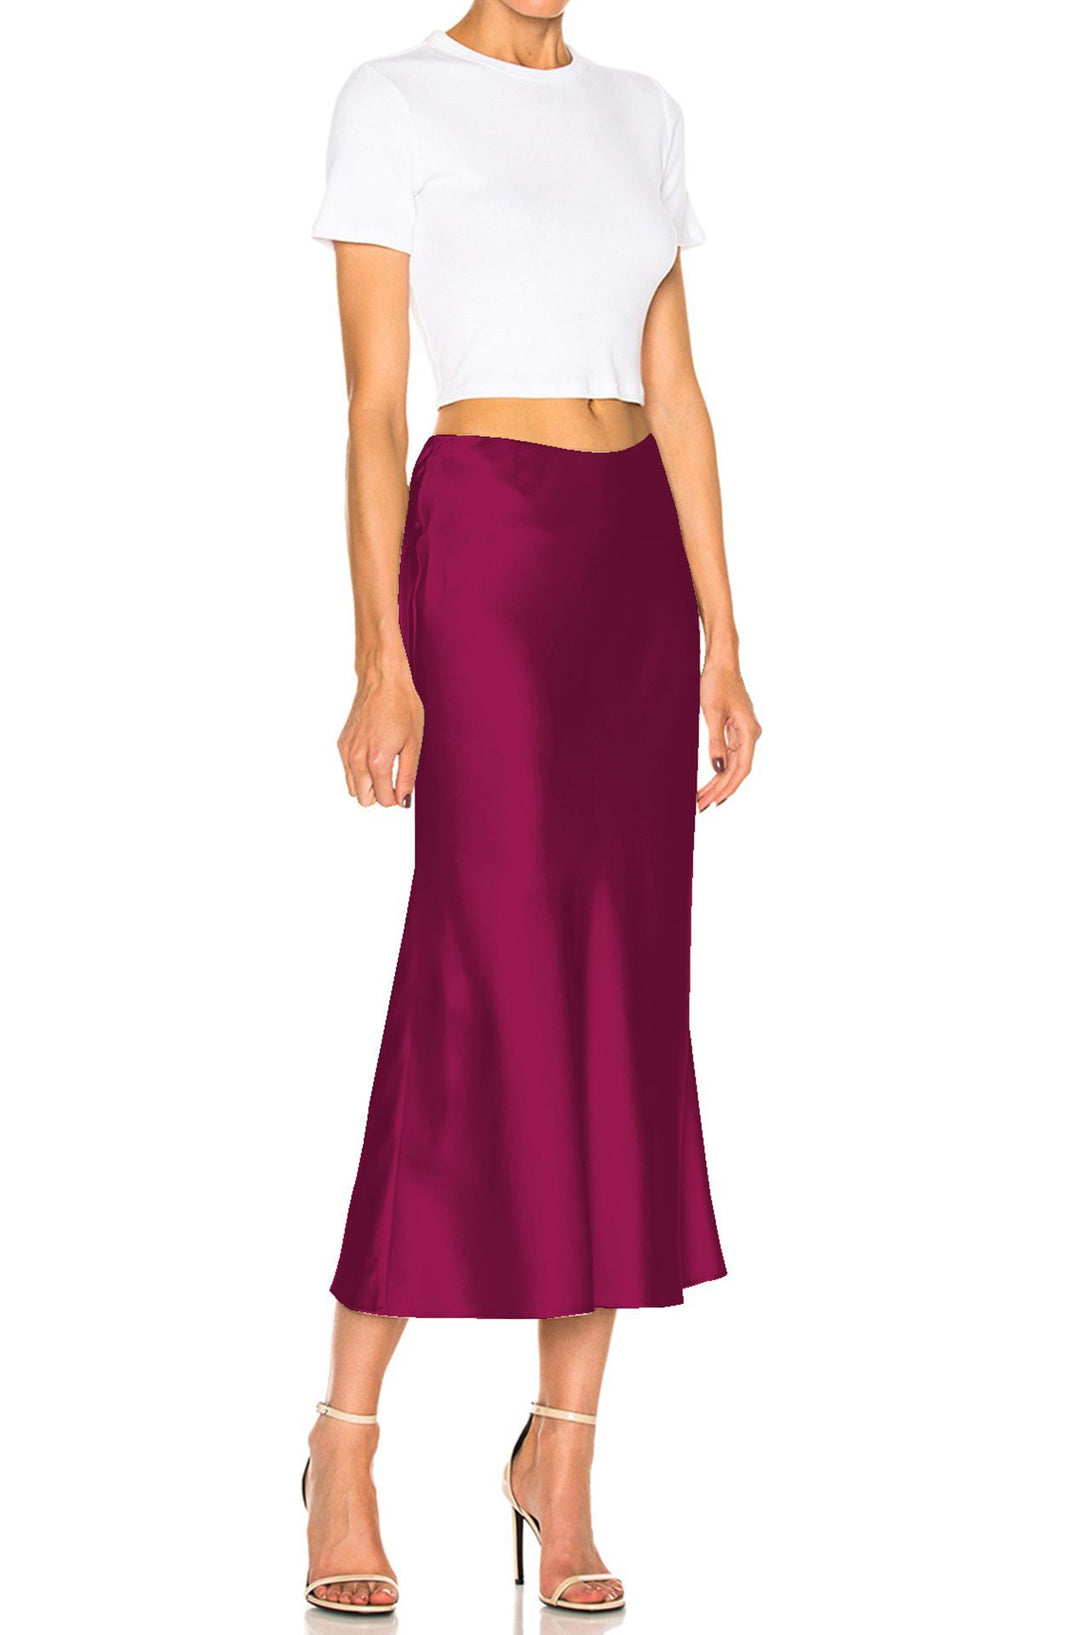 Skirt-In-Purple-For-Womens-By-Kyle-Richards